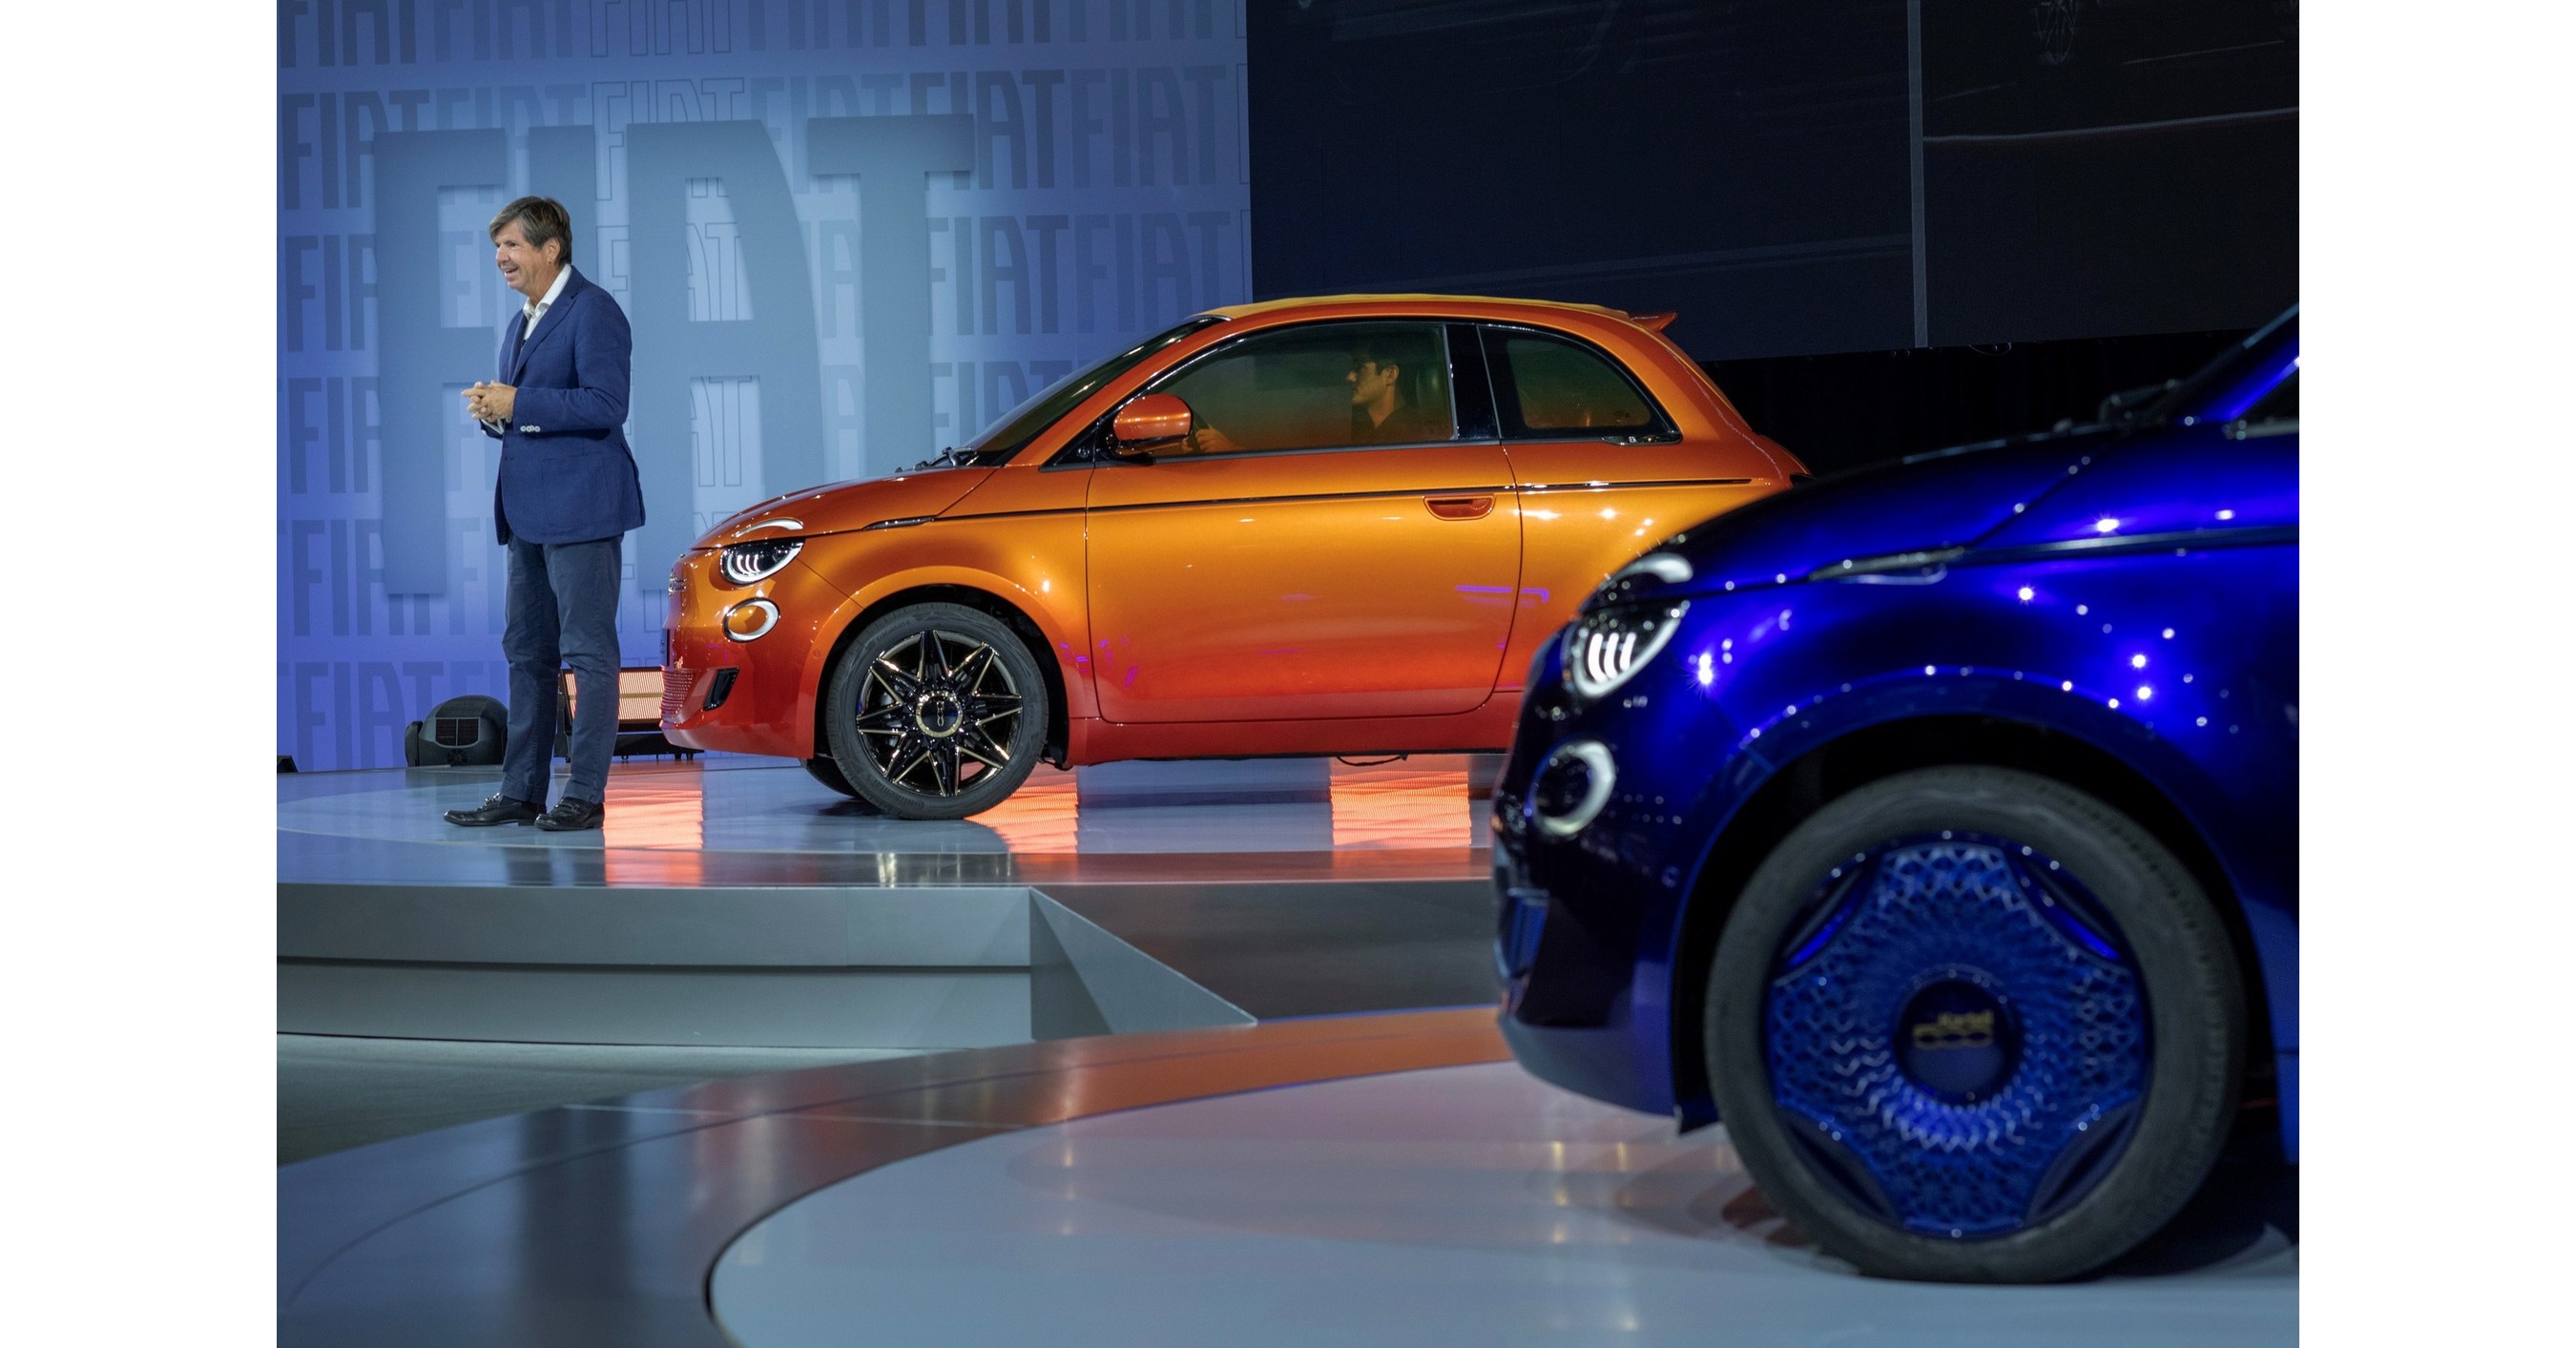 IS X FINALLY A REAL FIAT 500? - Auto.